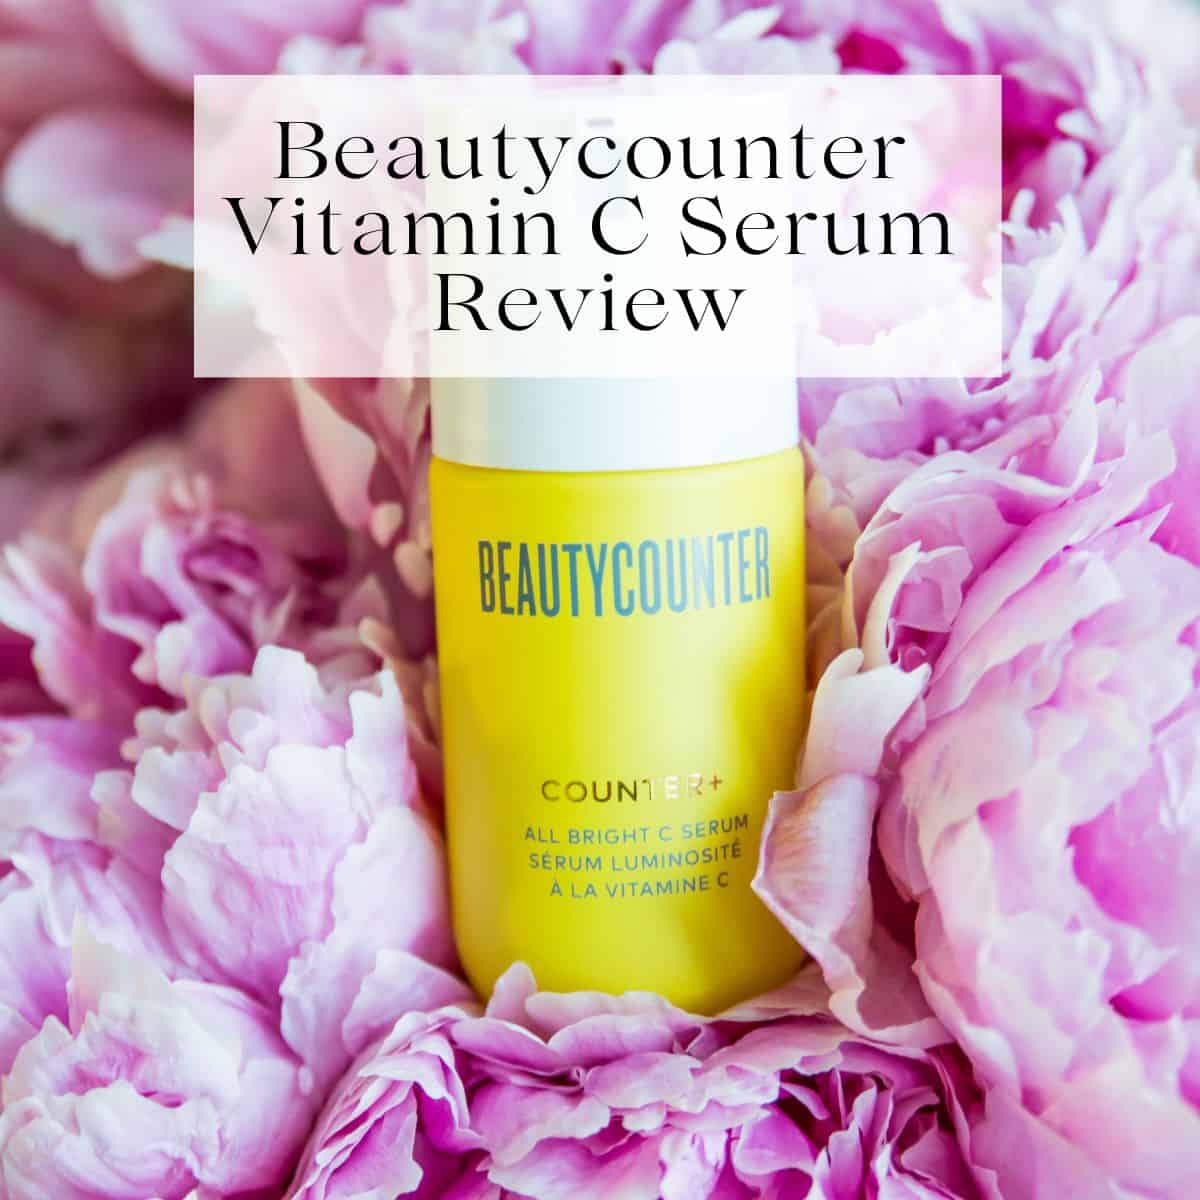 A bottle of Beautycounter's vitamin C serum on top of pink peonies with the title Beautycounter Vitamin C Serum Review over it.